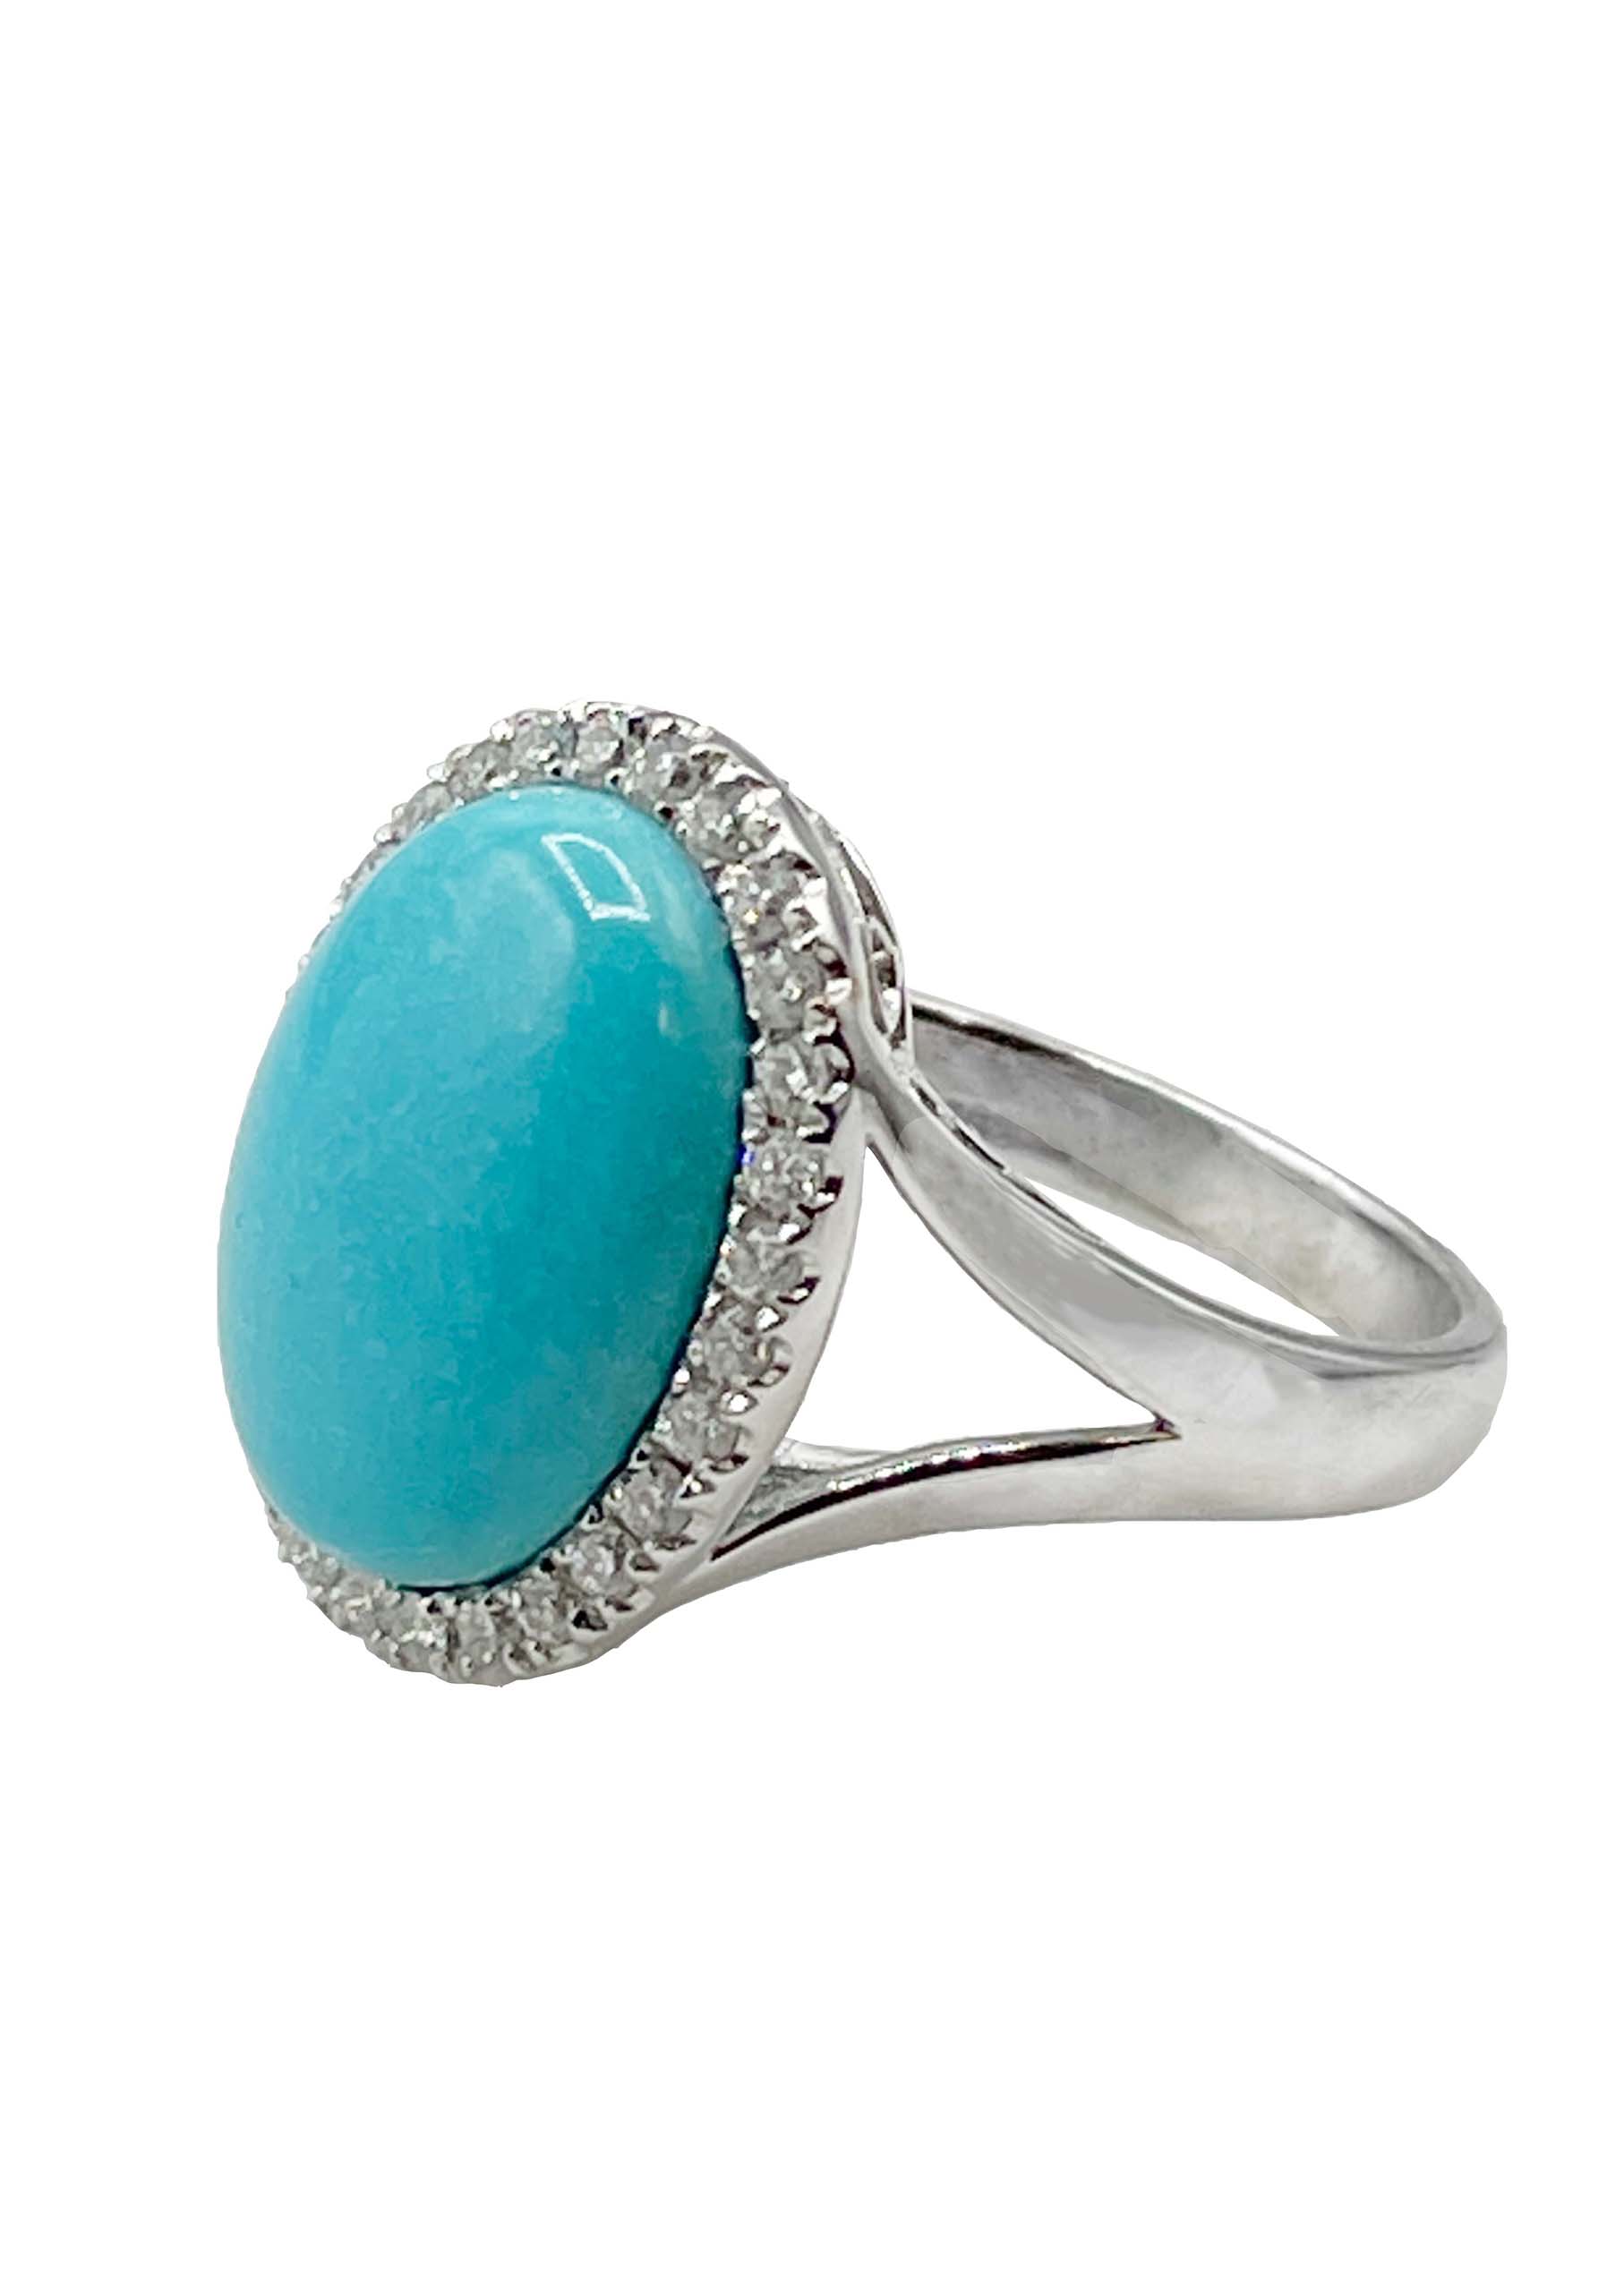 14K WHITE GOLD Smooth OVAL TURQUOISE RING WITH DIAMONDS Image